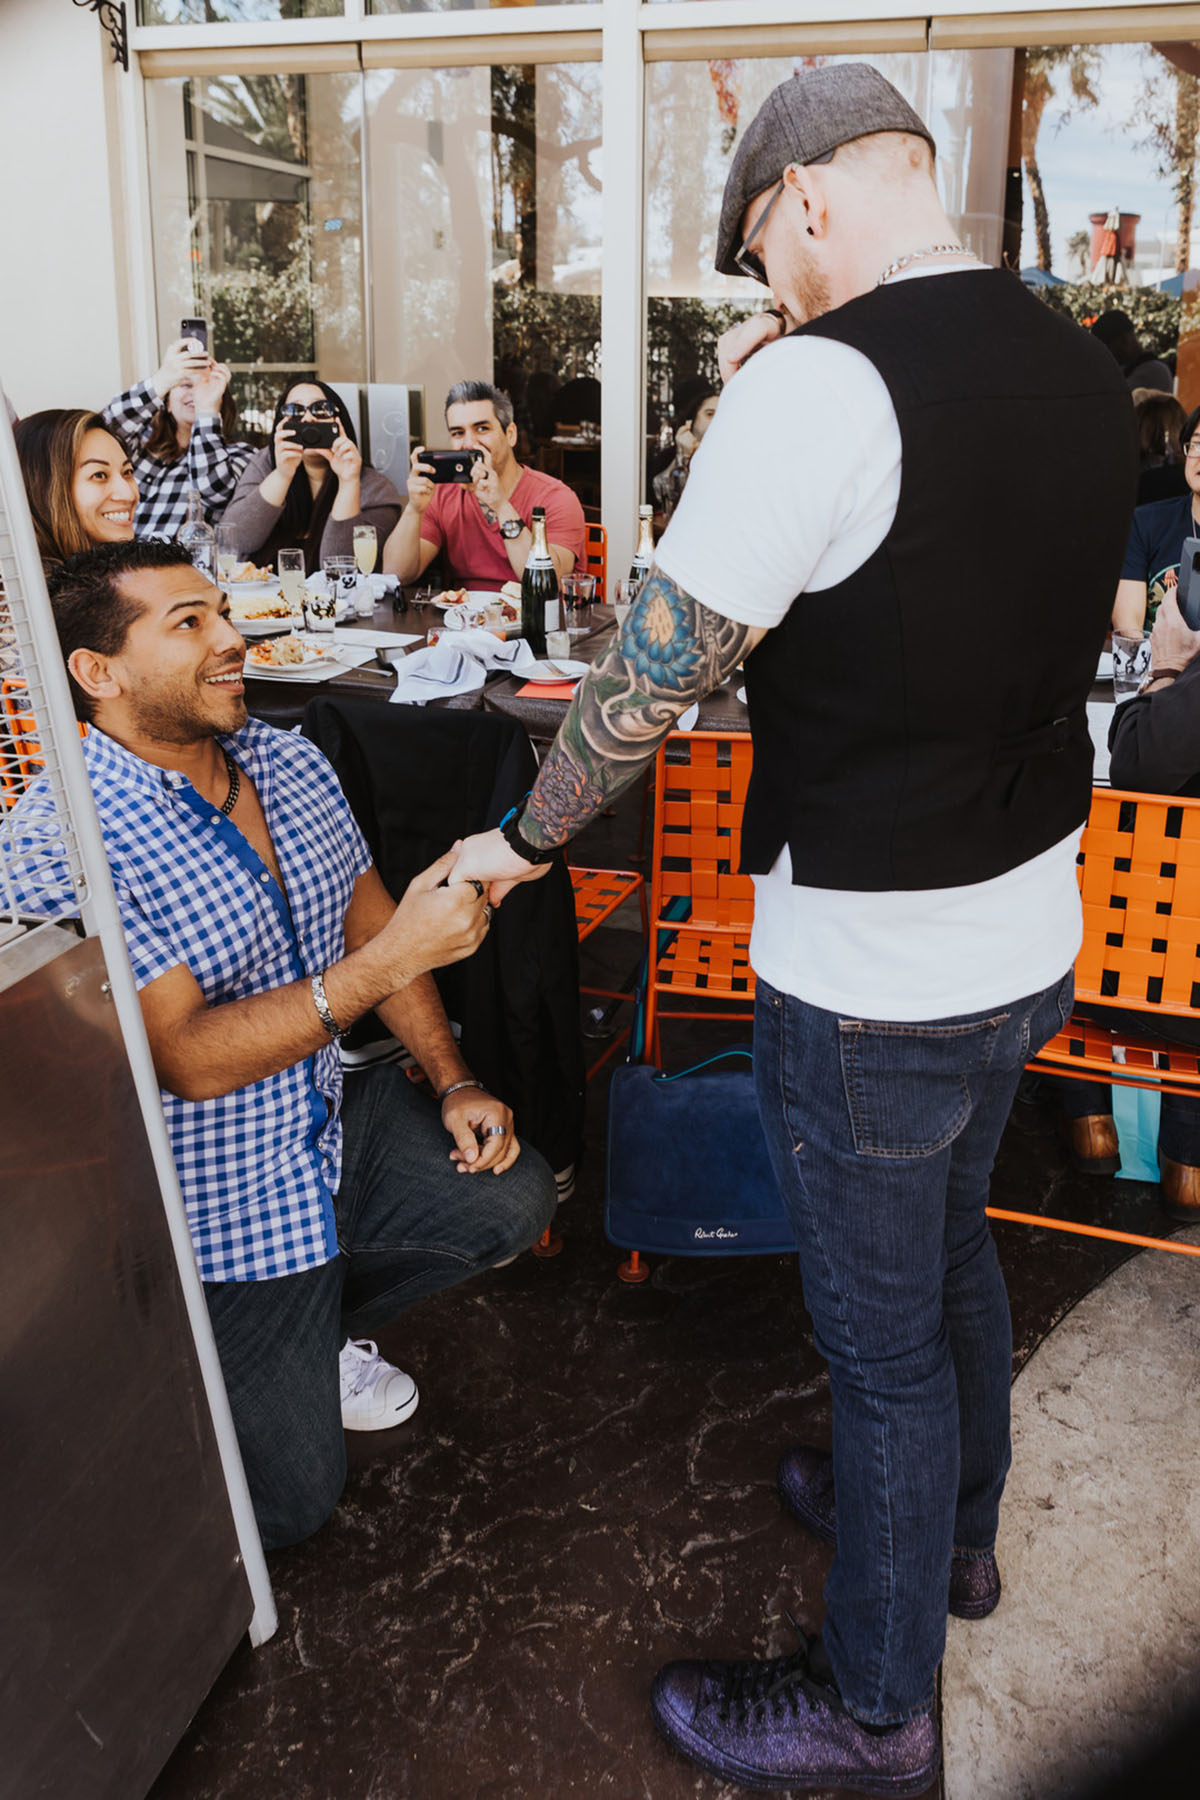 This surprise proposal Las Vegas-style will make you happy cry two grooms birthday Mandalay Bay brunch mimosas